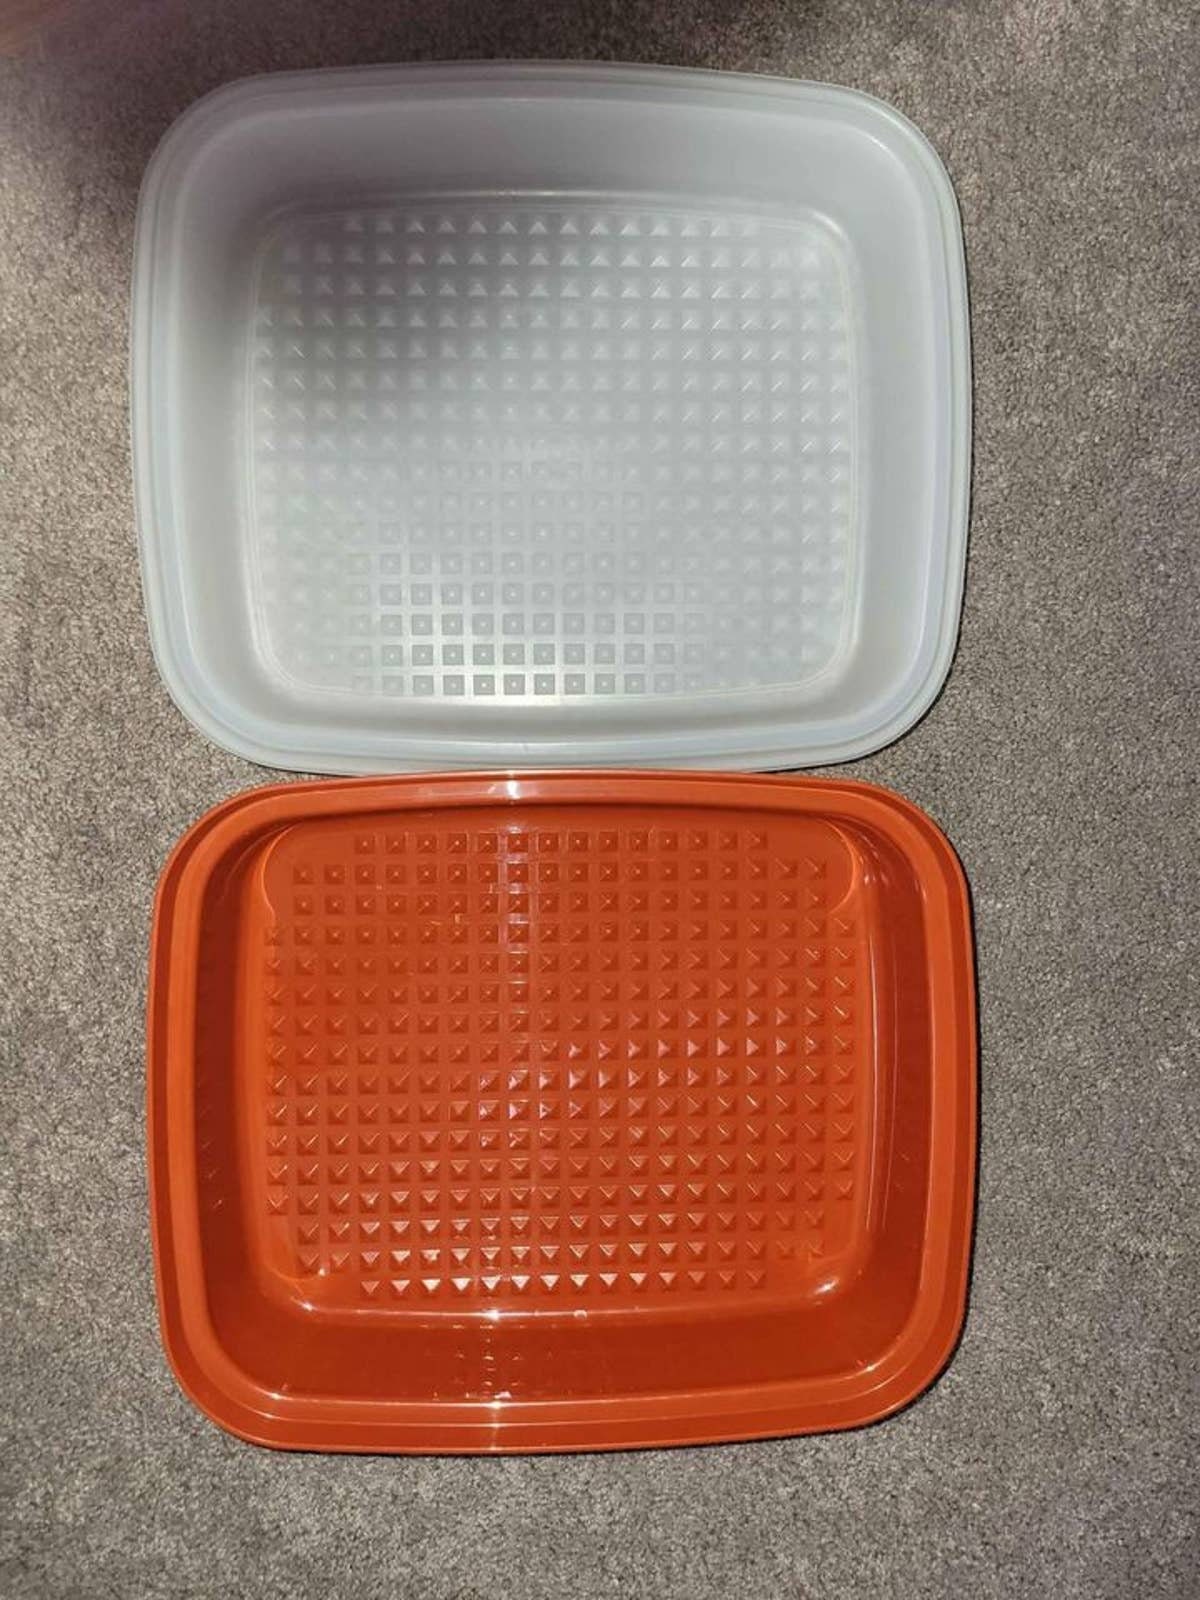 Tupperware Large Season Serve Meat Marinade Container With Lid, Paprika  Color, 10Diam x 12W Very Good Condition, #1294-7 Auction